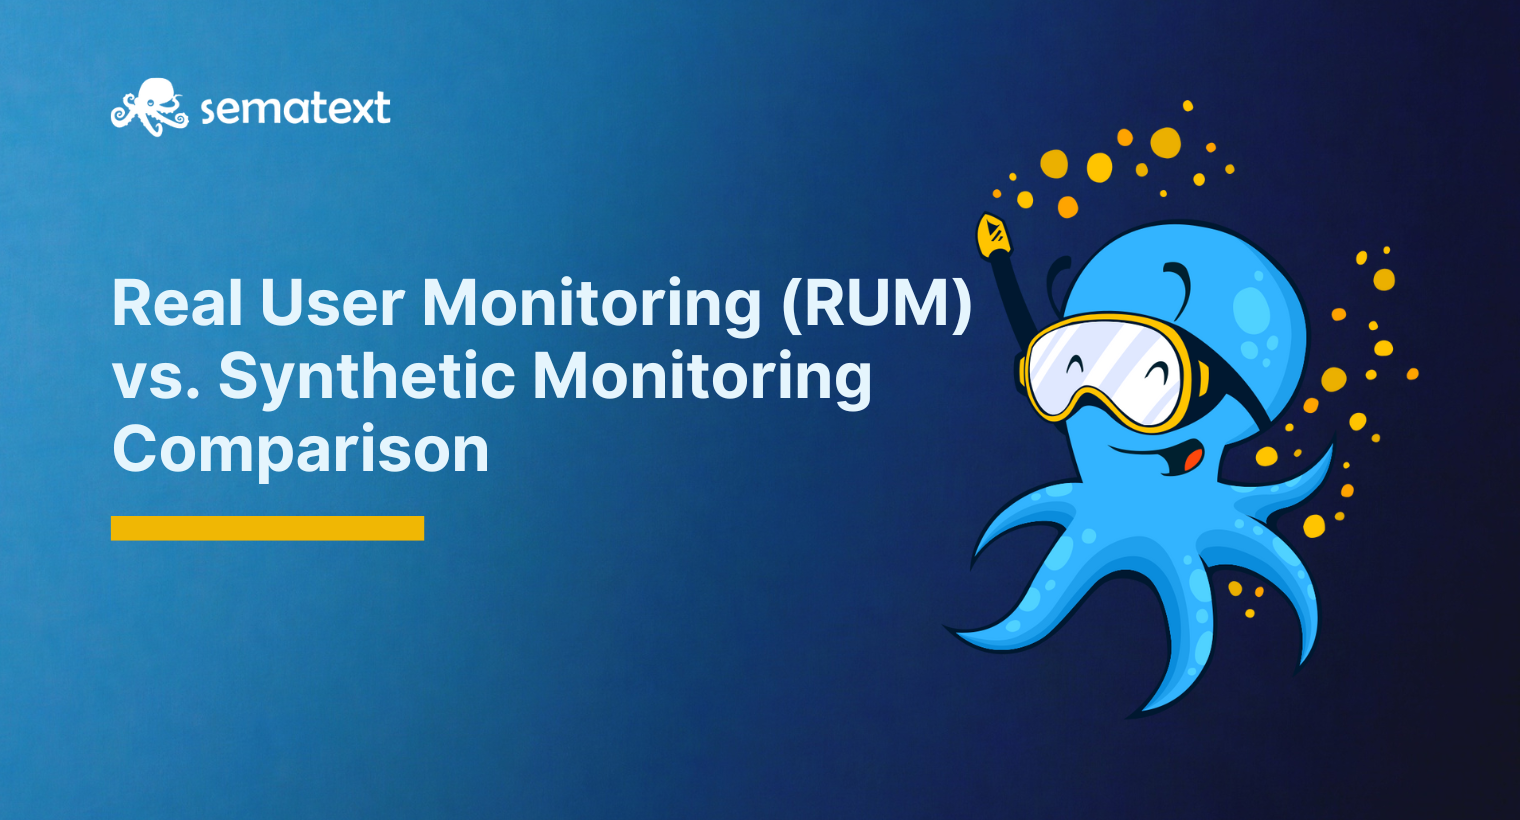 Real User Monitoring (RUM) vs. Synthetic Monitoring Comparison